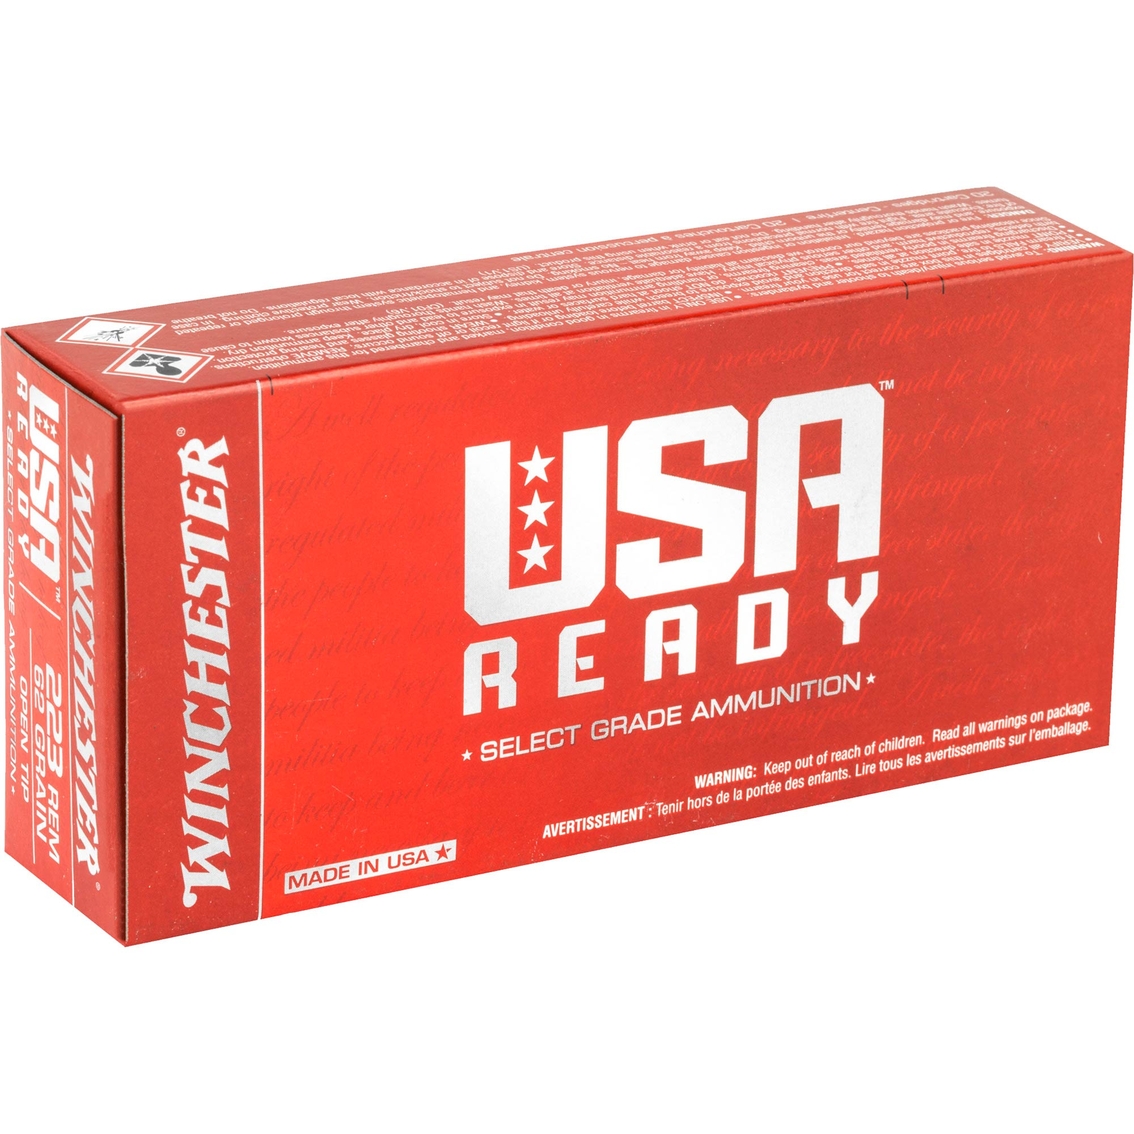 Winchester USA Ready 223 Rem 62 Gr. Open Tip, 20 Rnd - Image 3 of 4